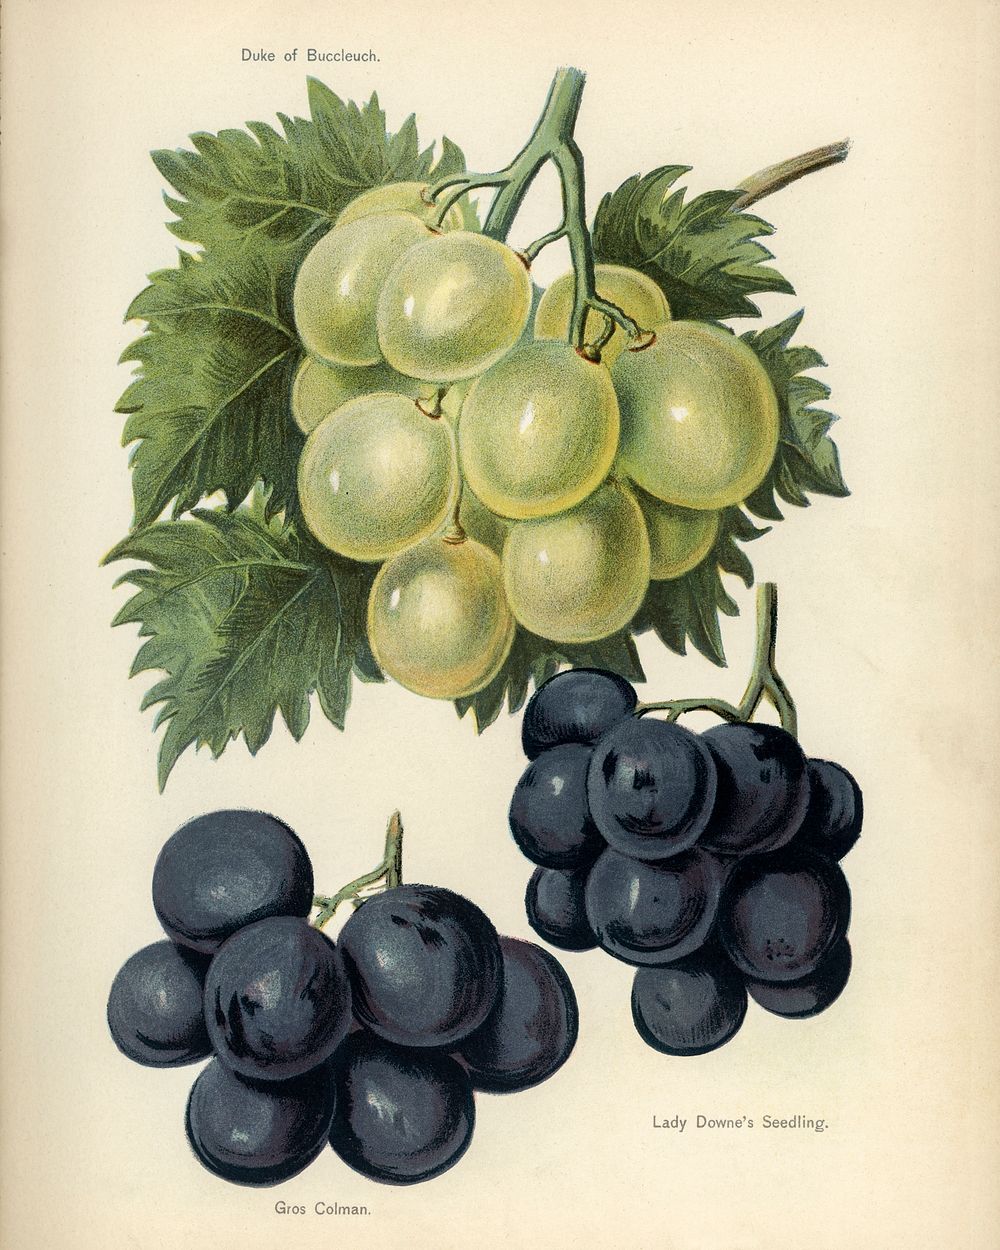 Vintage illustration of grapes digitally enhanced from our own vintage edition of The Fruit Grower's Guide (1891) by John…